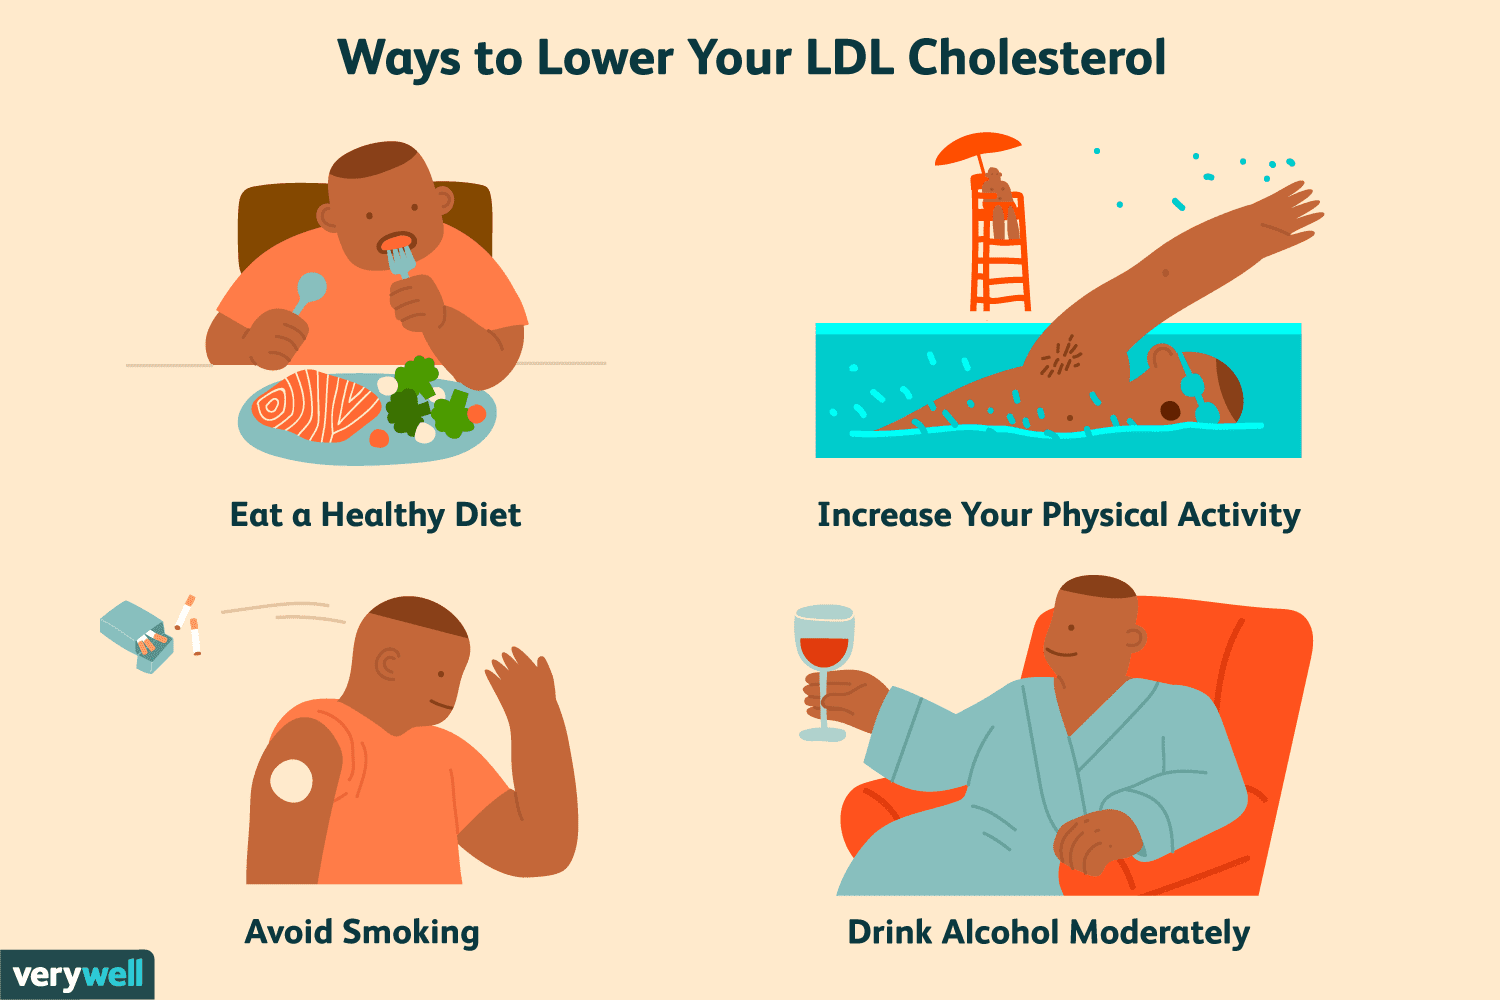 4 Simple Ways to Lower Your LDL Cholesterol